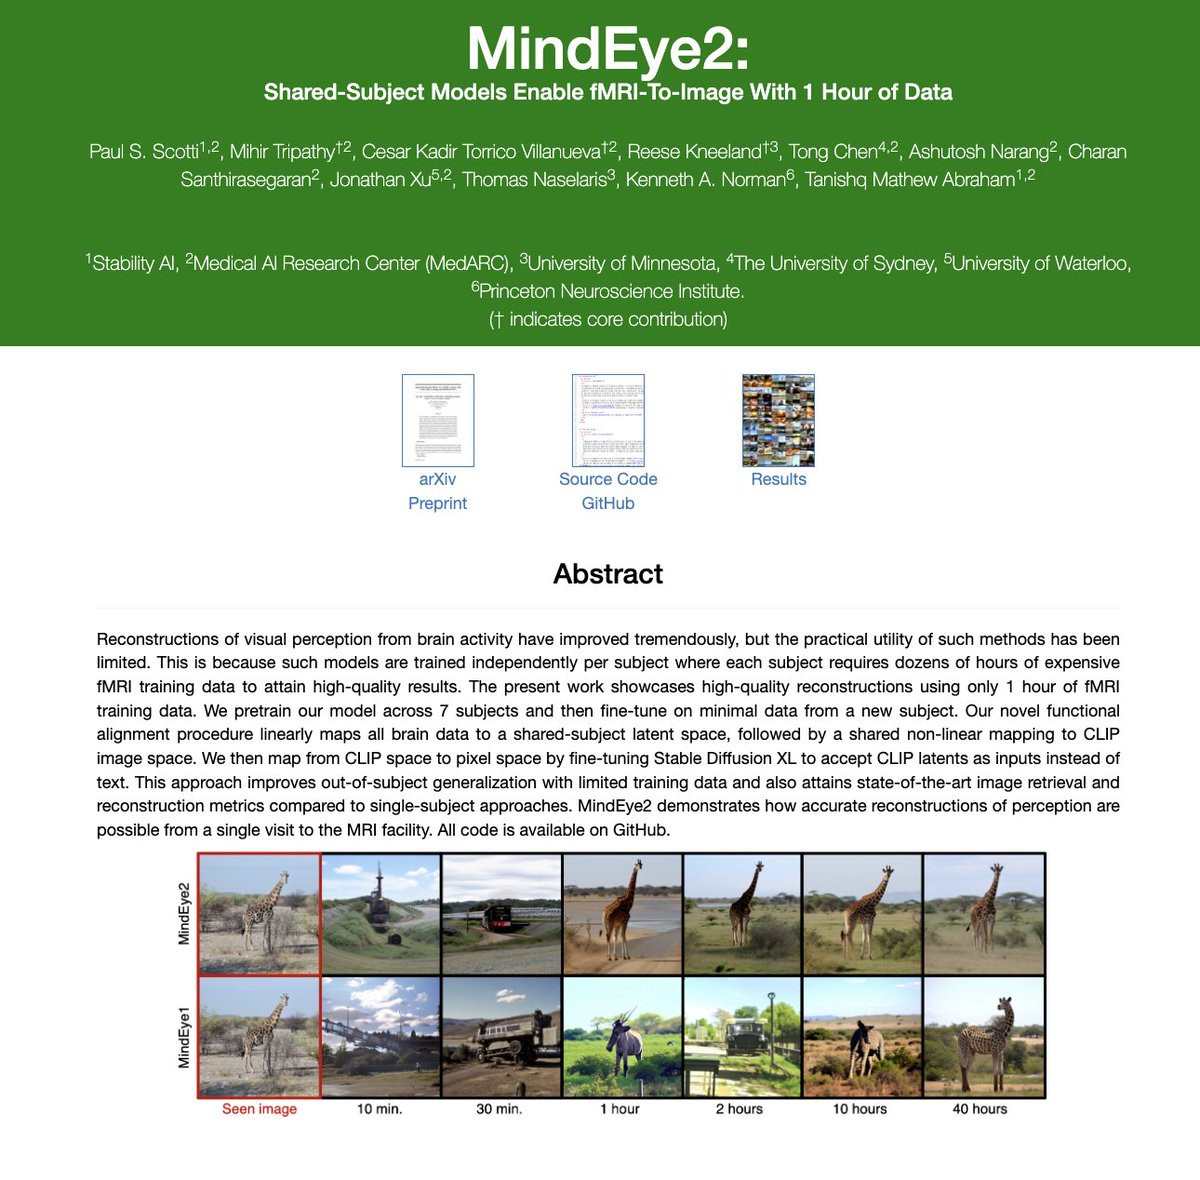 Excited to share our latest work on image reconstruction! Announcing MindEye2: Shared-Subject Models Enable fMRI-To-Image with 1 Hour of Data medarc.ai/mindeye2